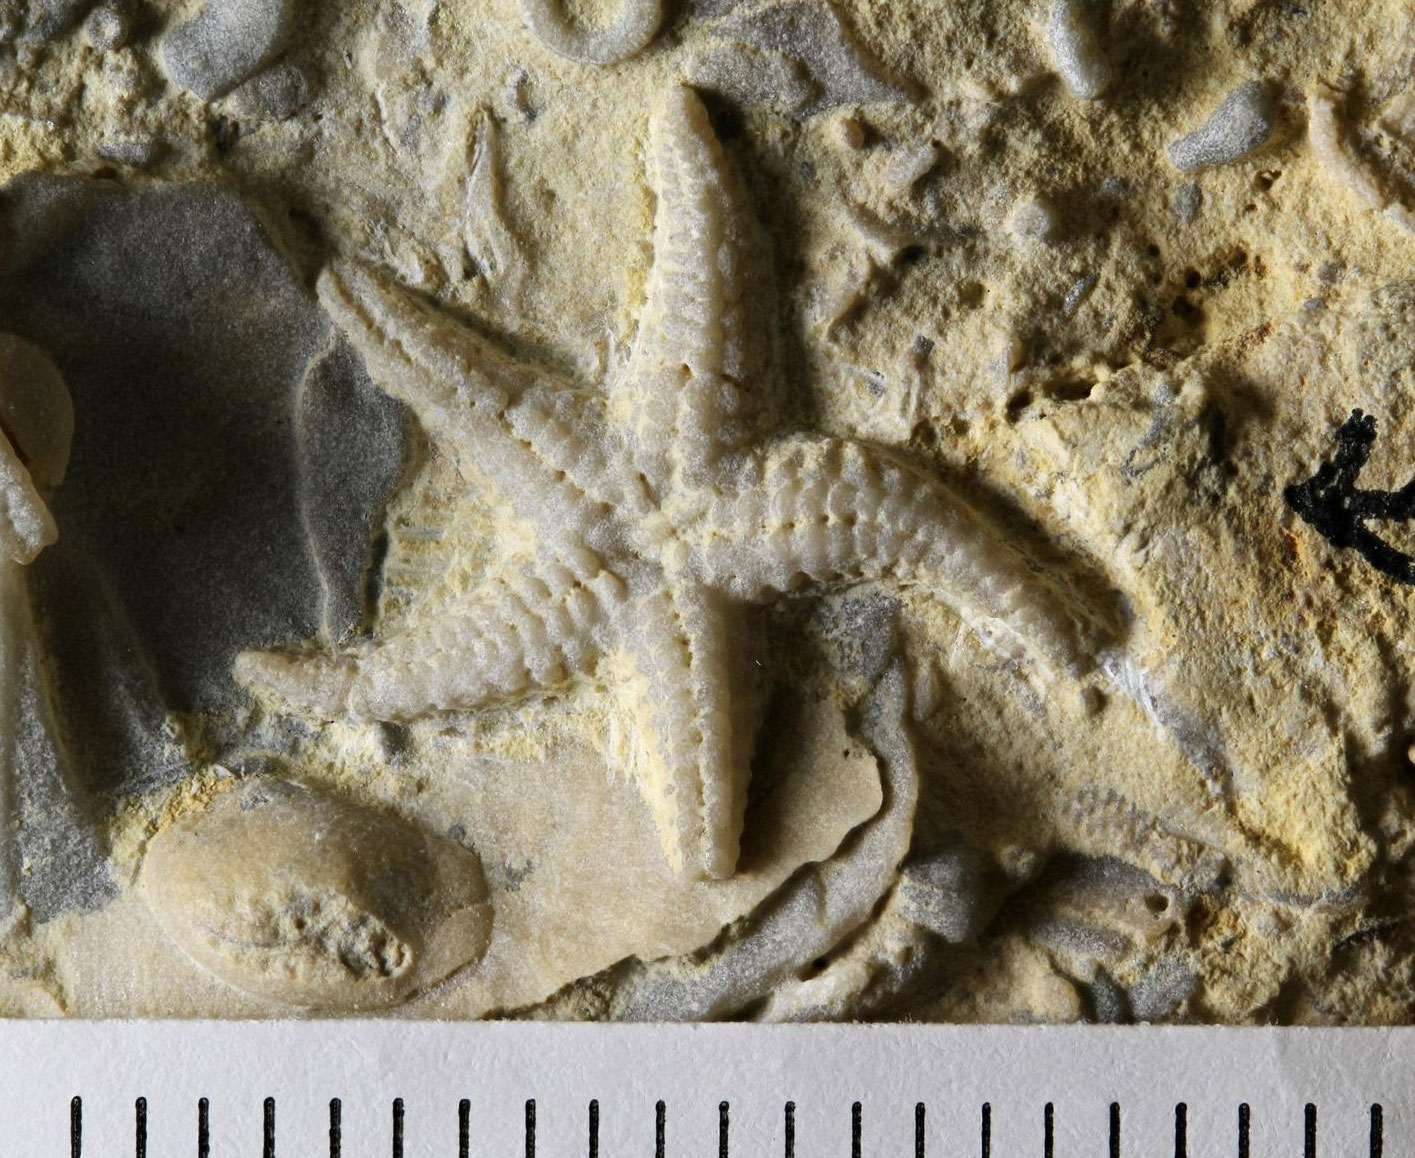 Photograph of a starfish from the Ordovician of Wisconsin. The photo shows a small starfish with five arms preserved on the surface of a yellowish-beige rock along with fragments of other fossils. The starfish measures about 1.5 centimeters in diameter based on a scale at the bottom of the image.